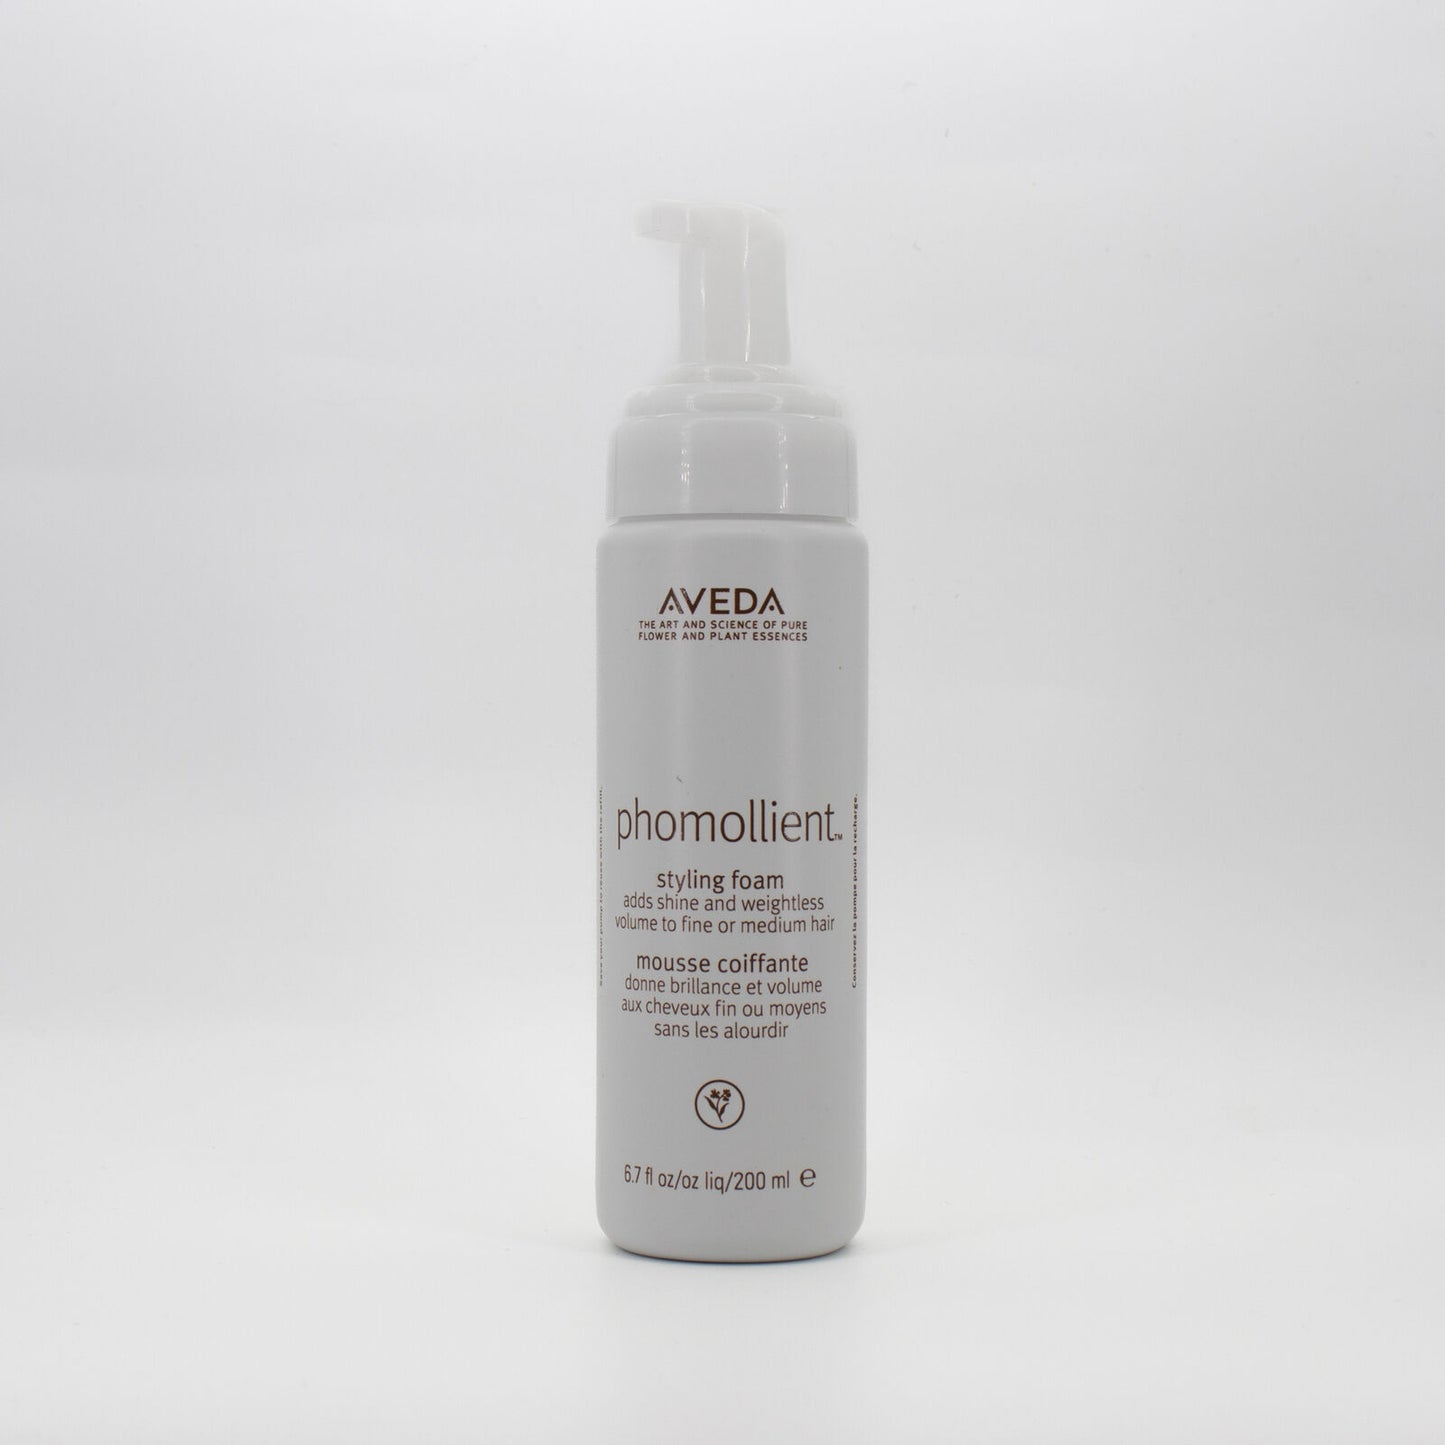 Aveda Phomollient Styling Foam 200ml - Missing lid - This is Beauty UK